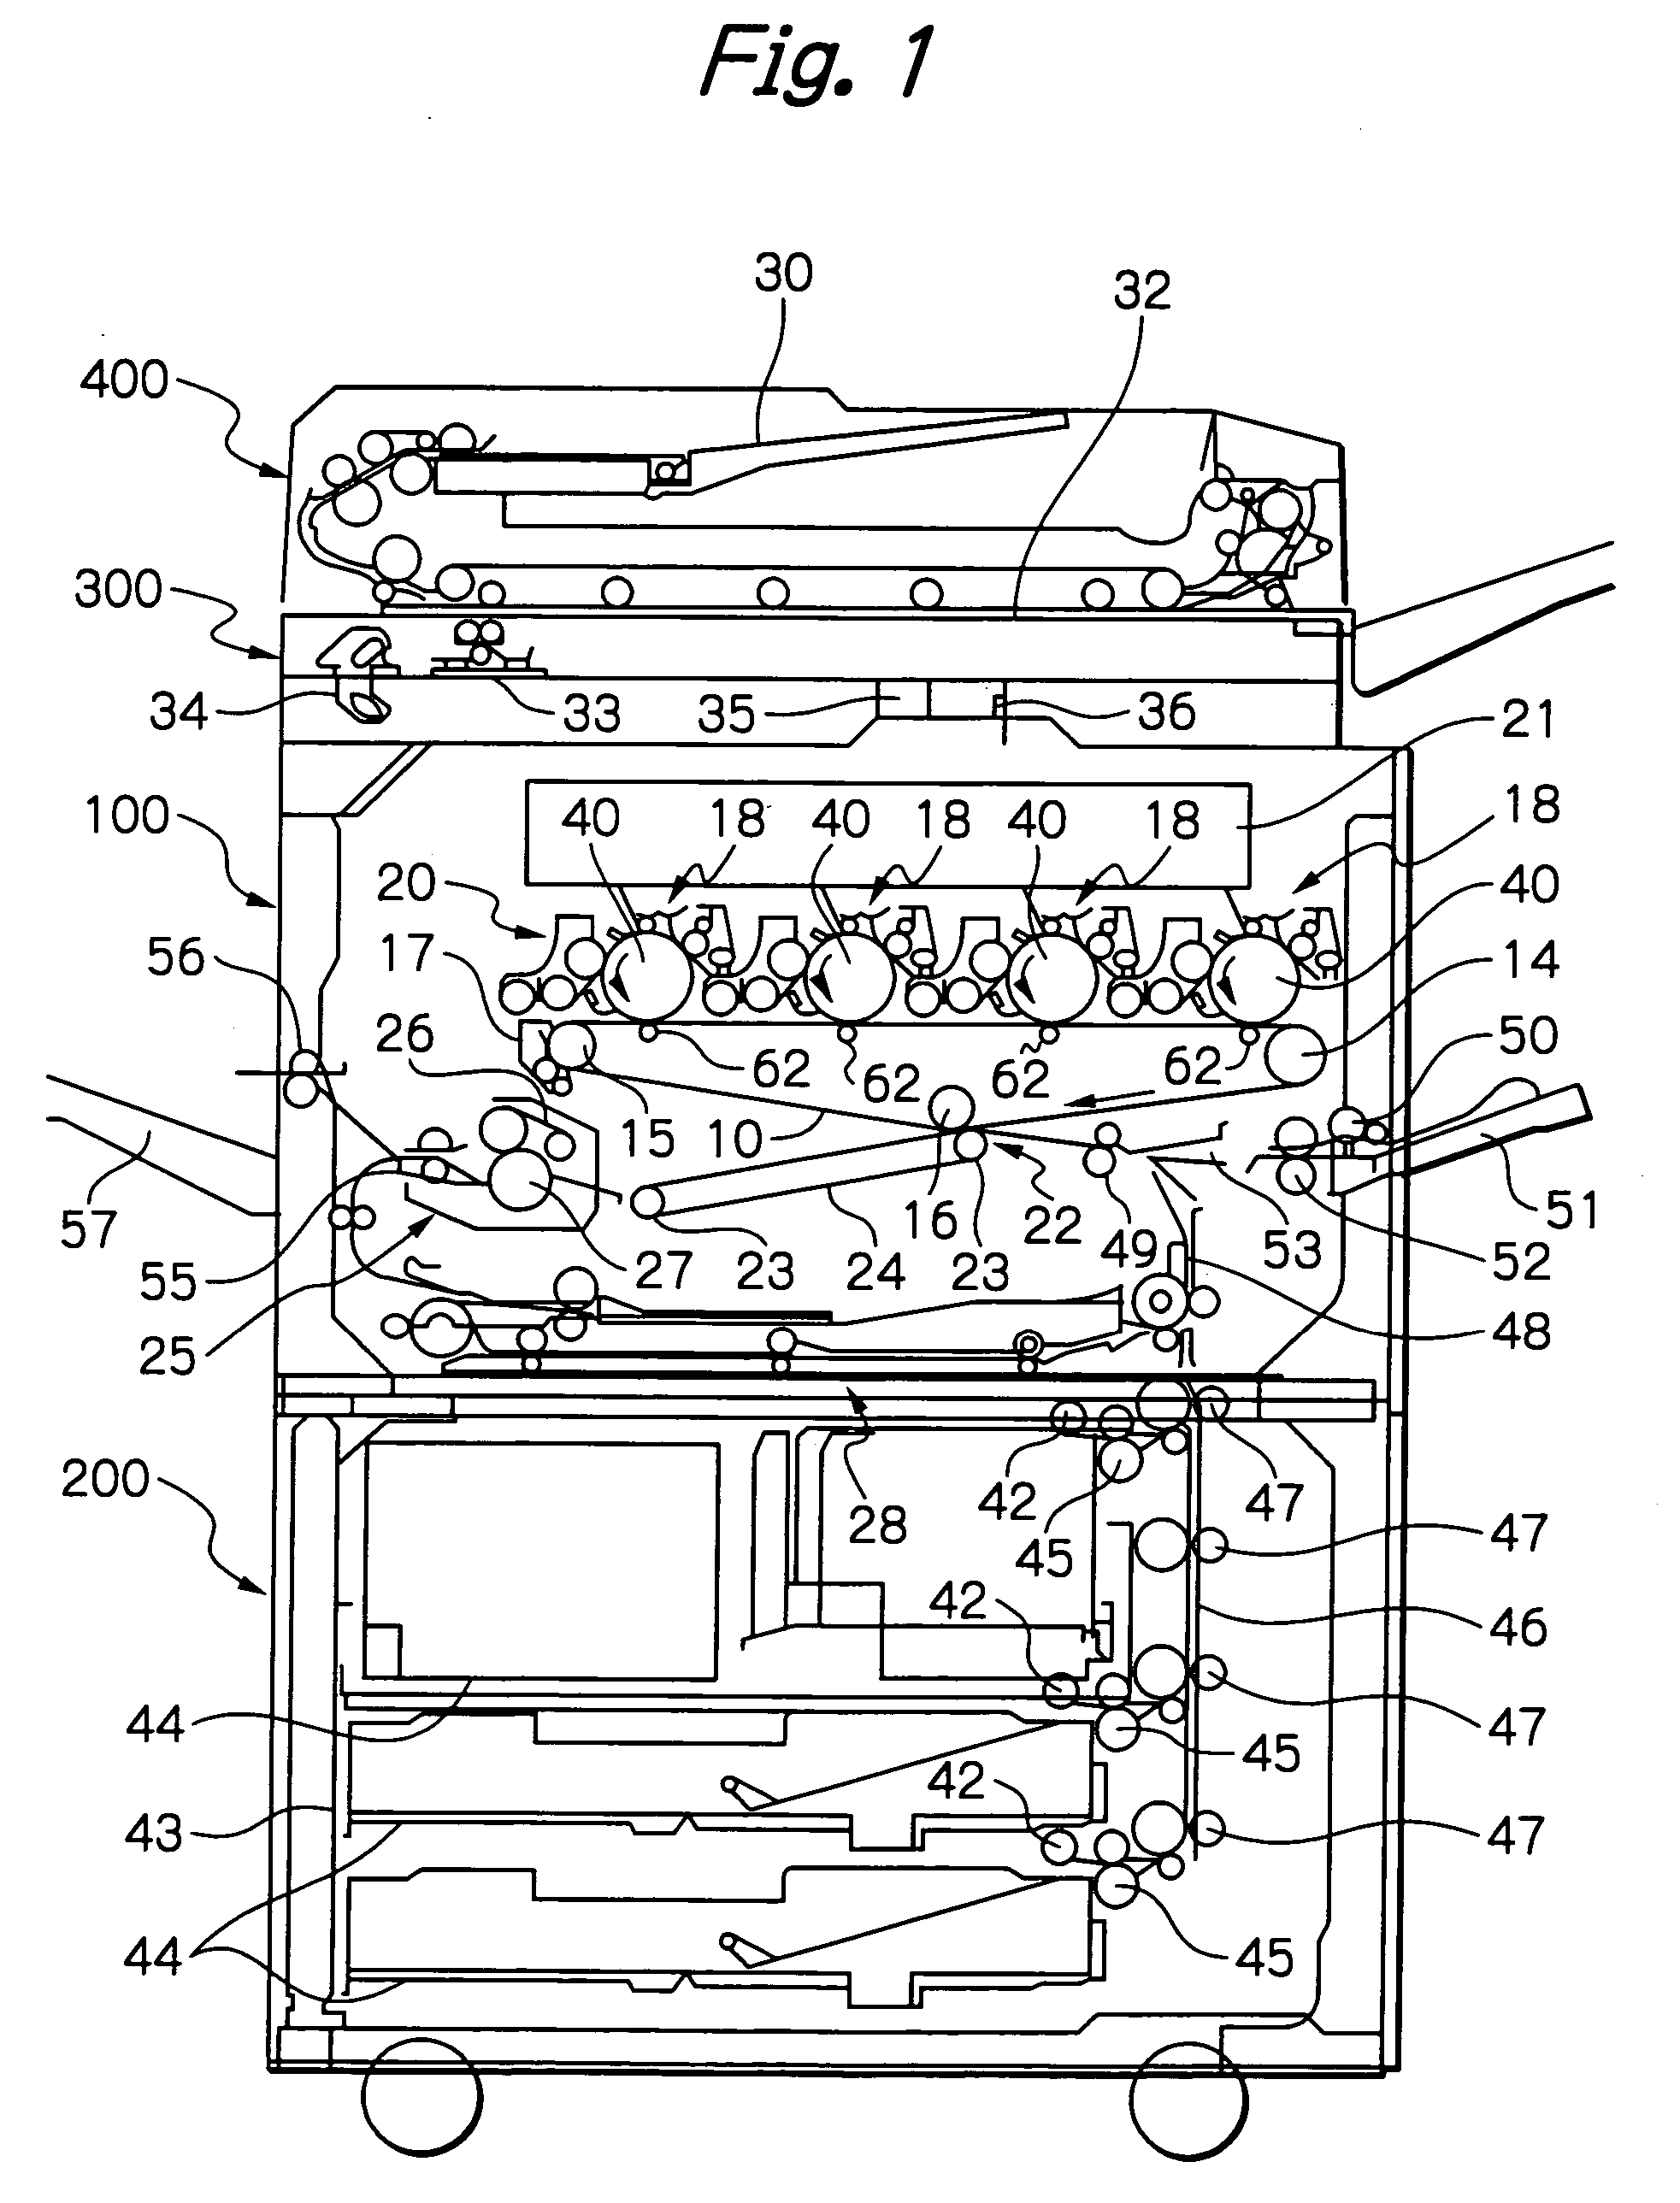 Tandem image forming device having a side-by-side arrangement of image forming sections